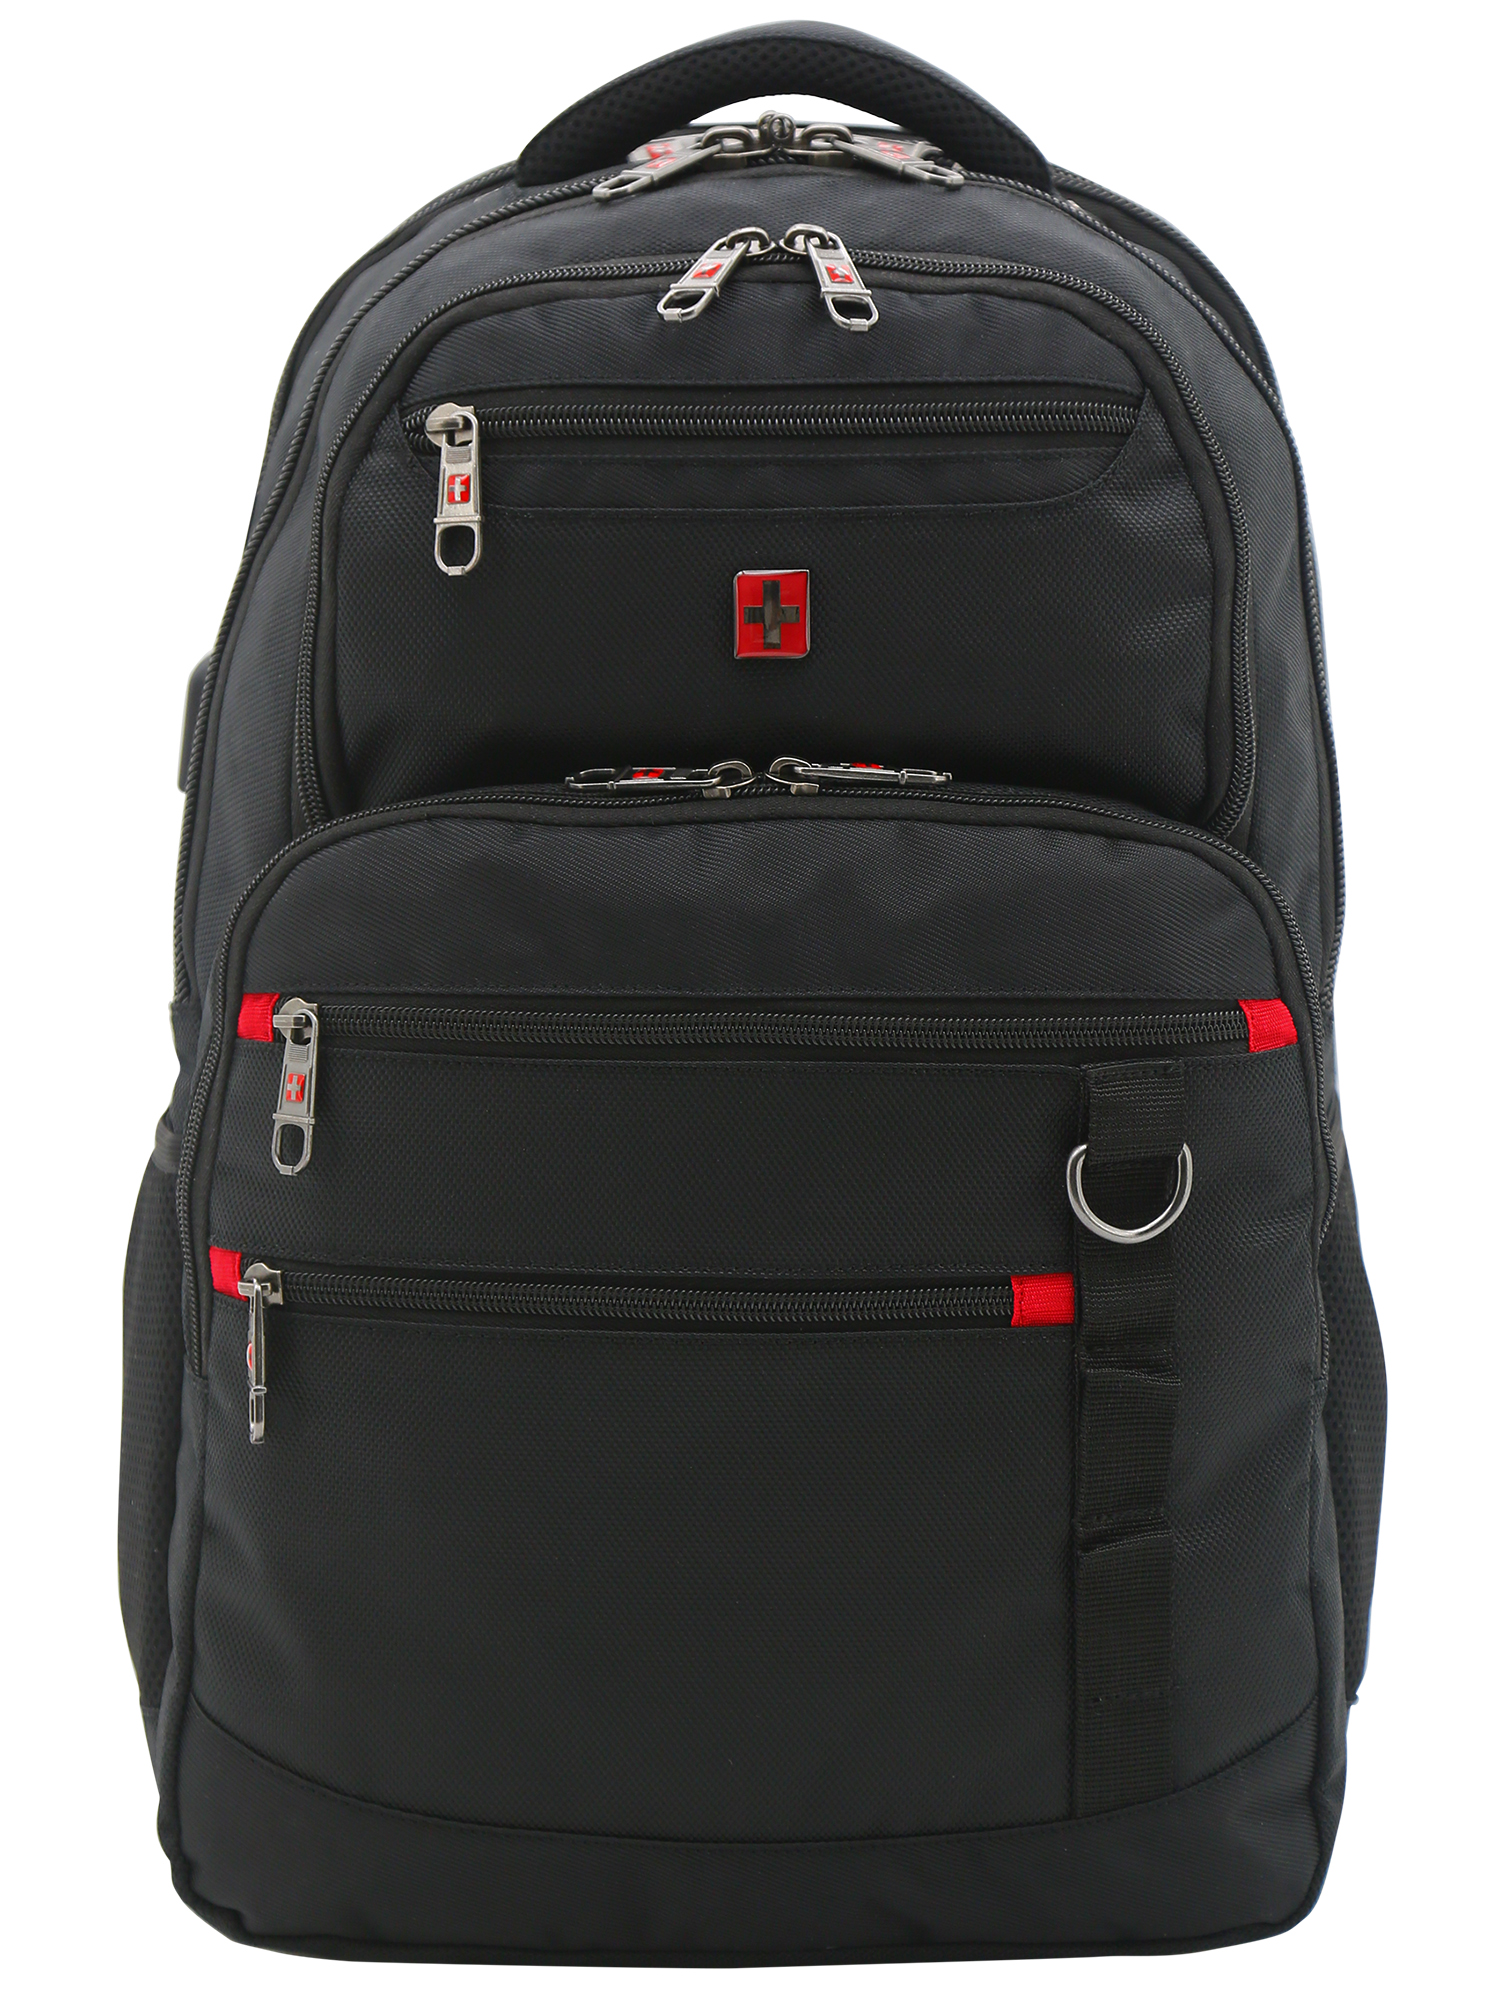 Swiss Tech Navigator Backpack with Padded Laptop Section - image 4 of 9